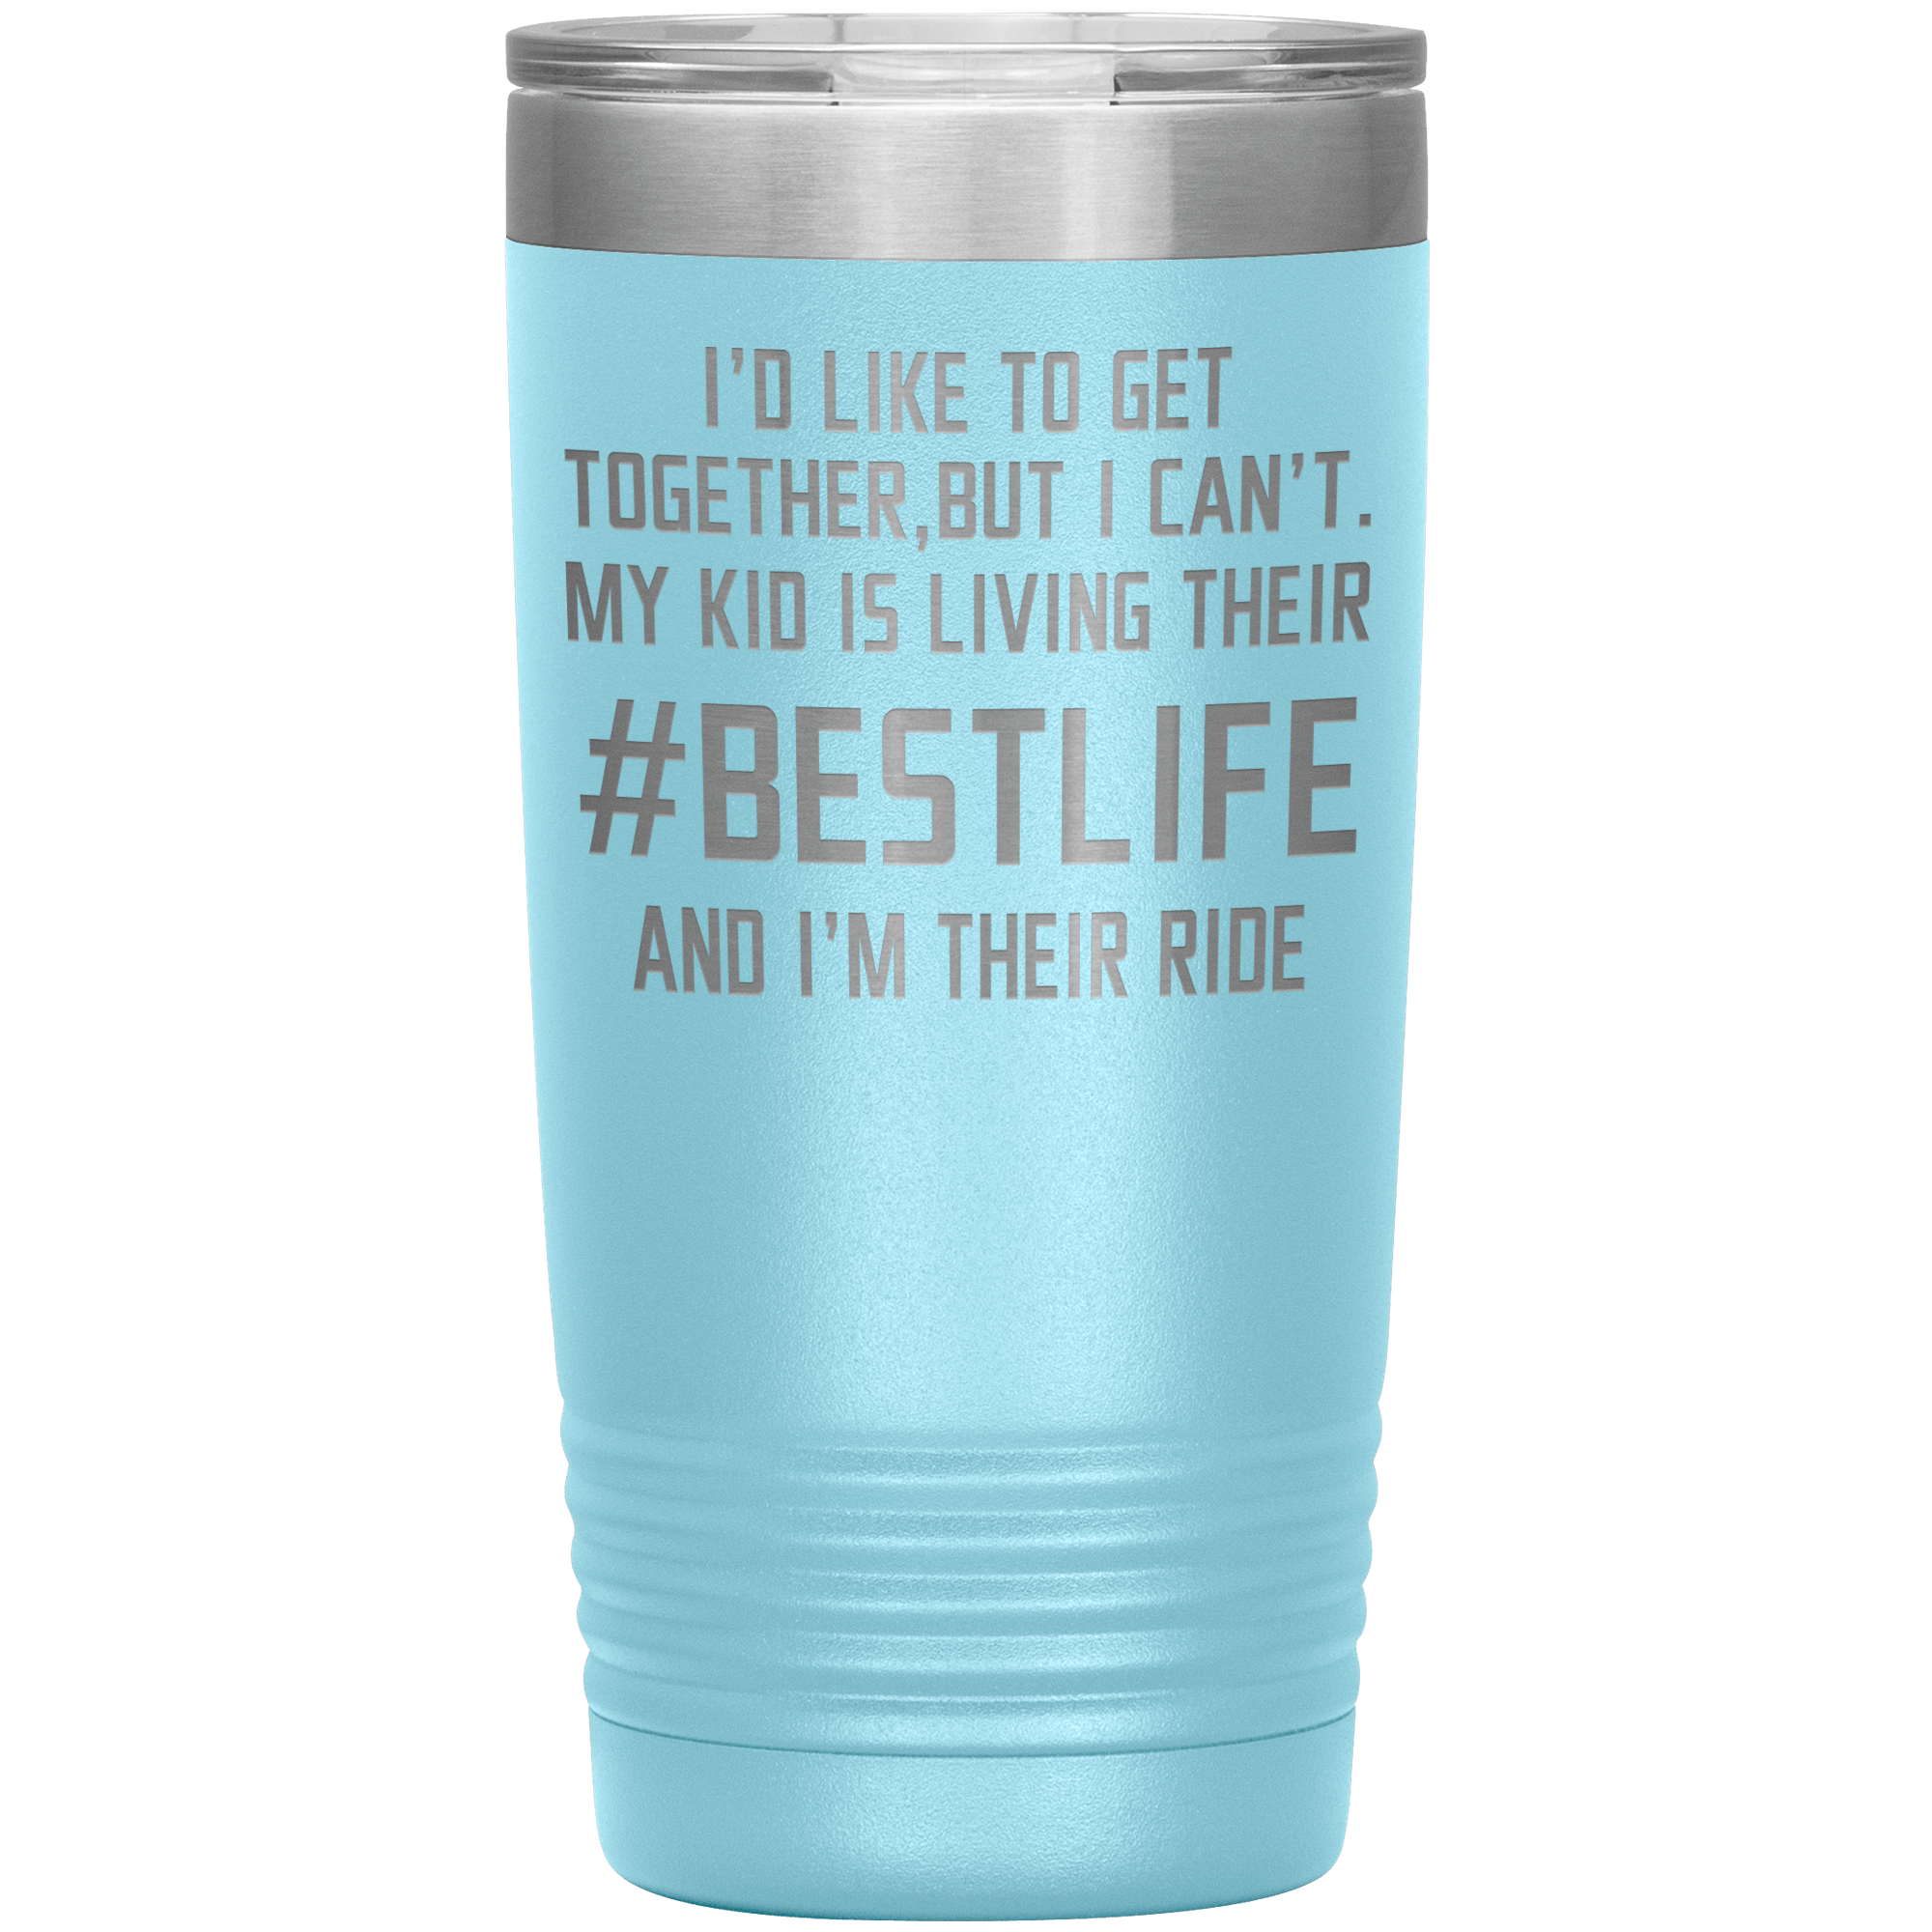 " MY KID IS LIVING THEIR BEST LIFE AND I'M THEIR RIDE " TUMBLER